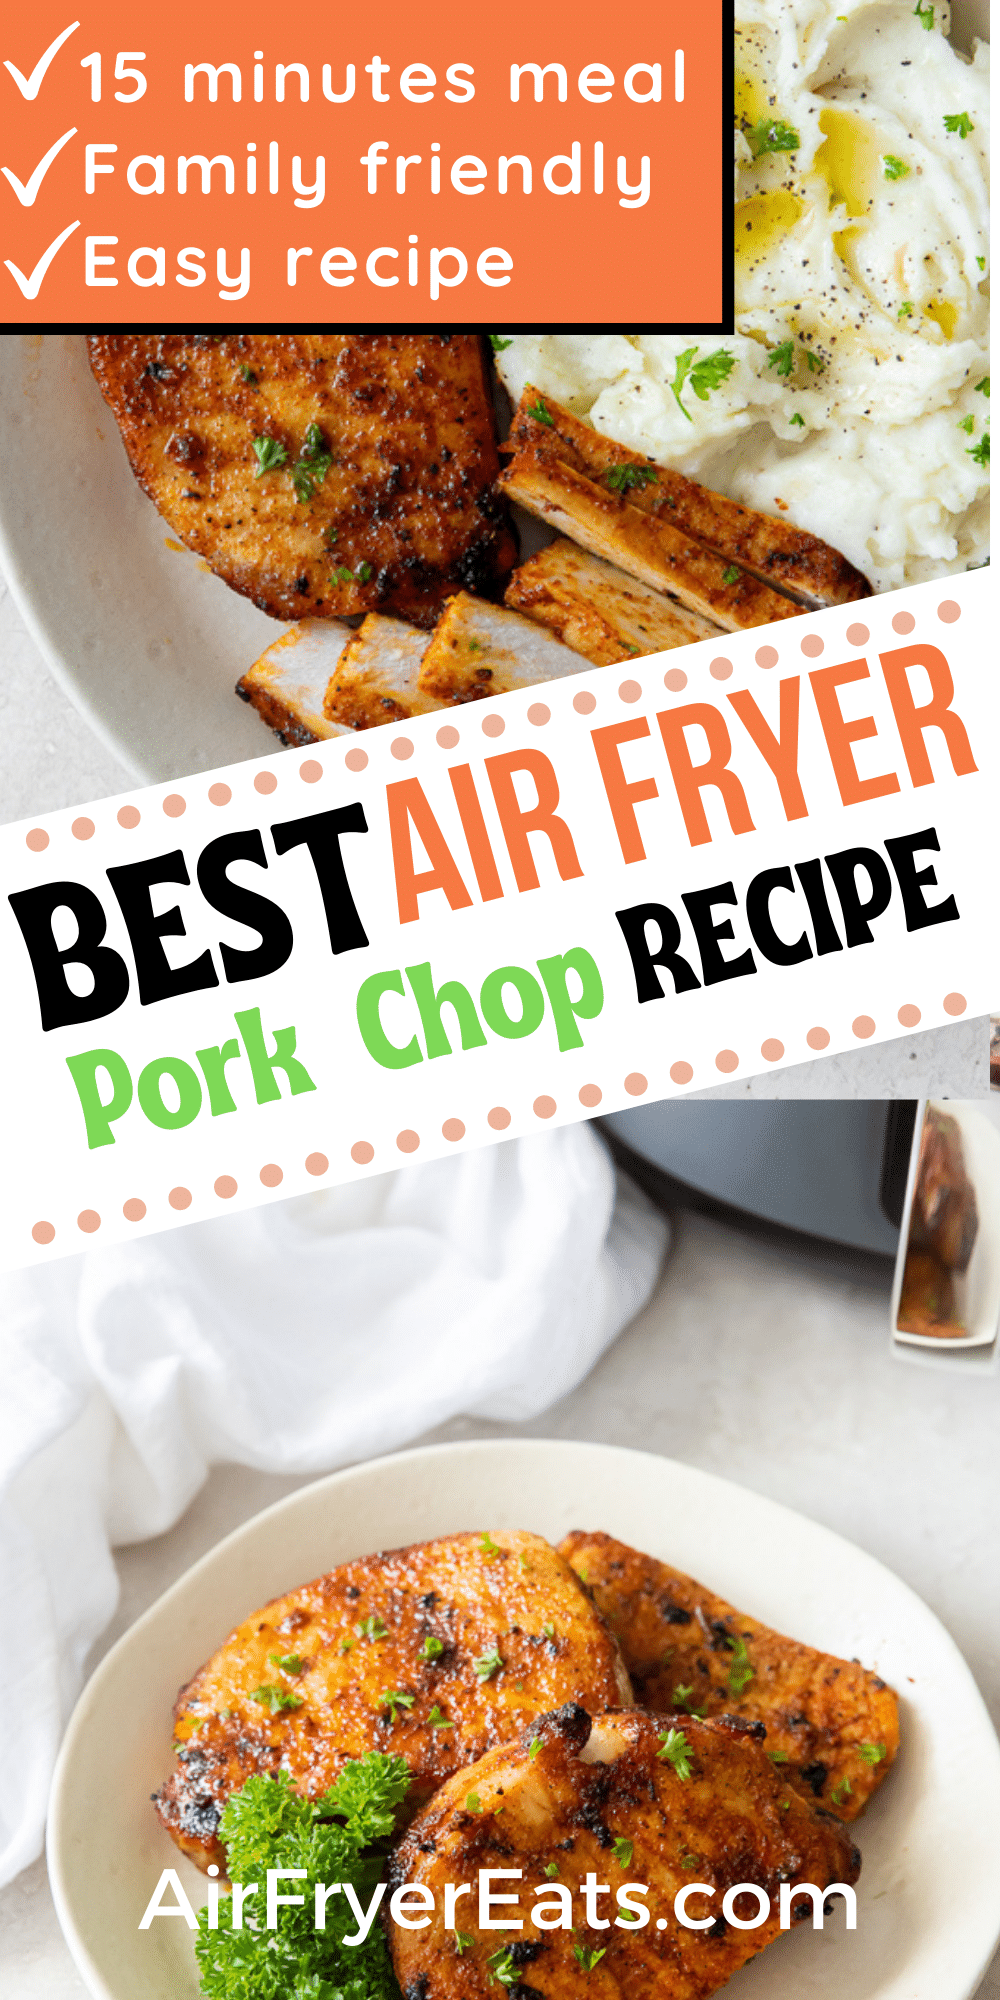 Air Fryer Pork chops - no breading needed to enjoy juicy, delicious pork chops in the air fryer! A simple seasoning blend gives these air fryer pork chops great flavor, and they're ready in less than 10 minutes. #porkchops @airfryerpork via @vegetarianmamma